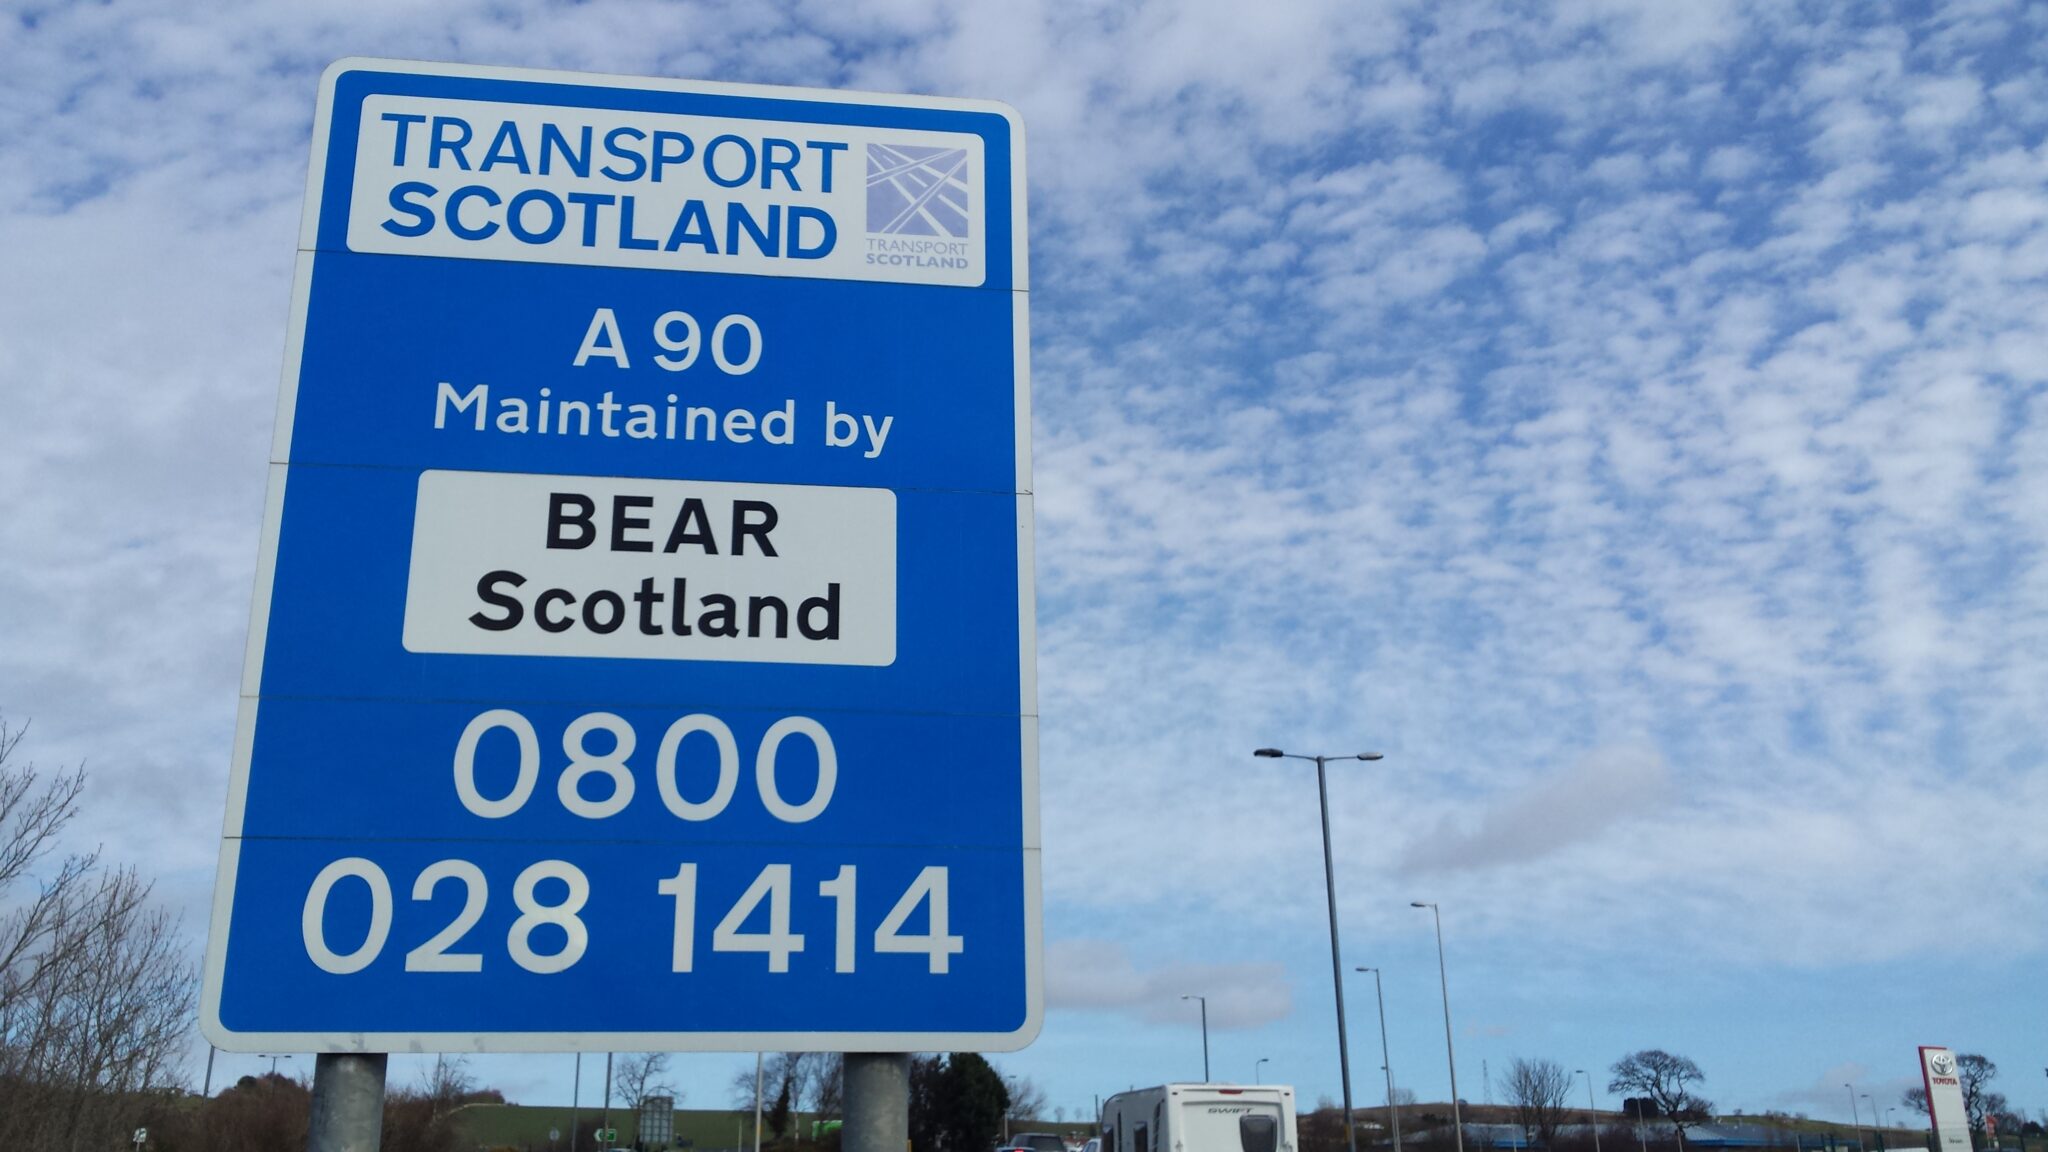 £300,000 SURFACING IMPROVEMENTS PLANNED FOR THE A90 NORTHBOUND AT FORFAR JUNCTION